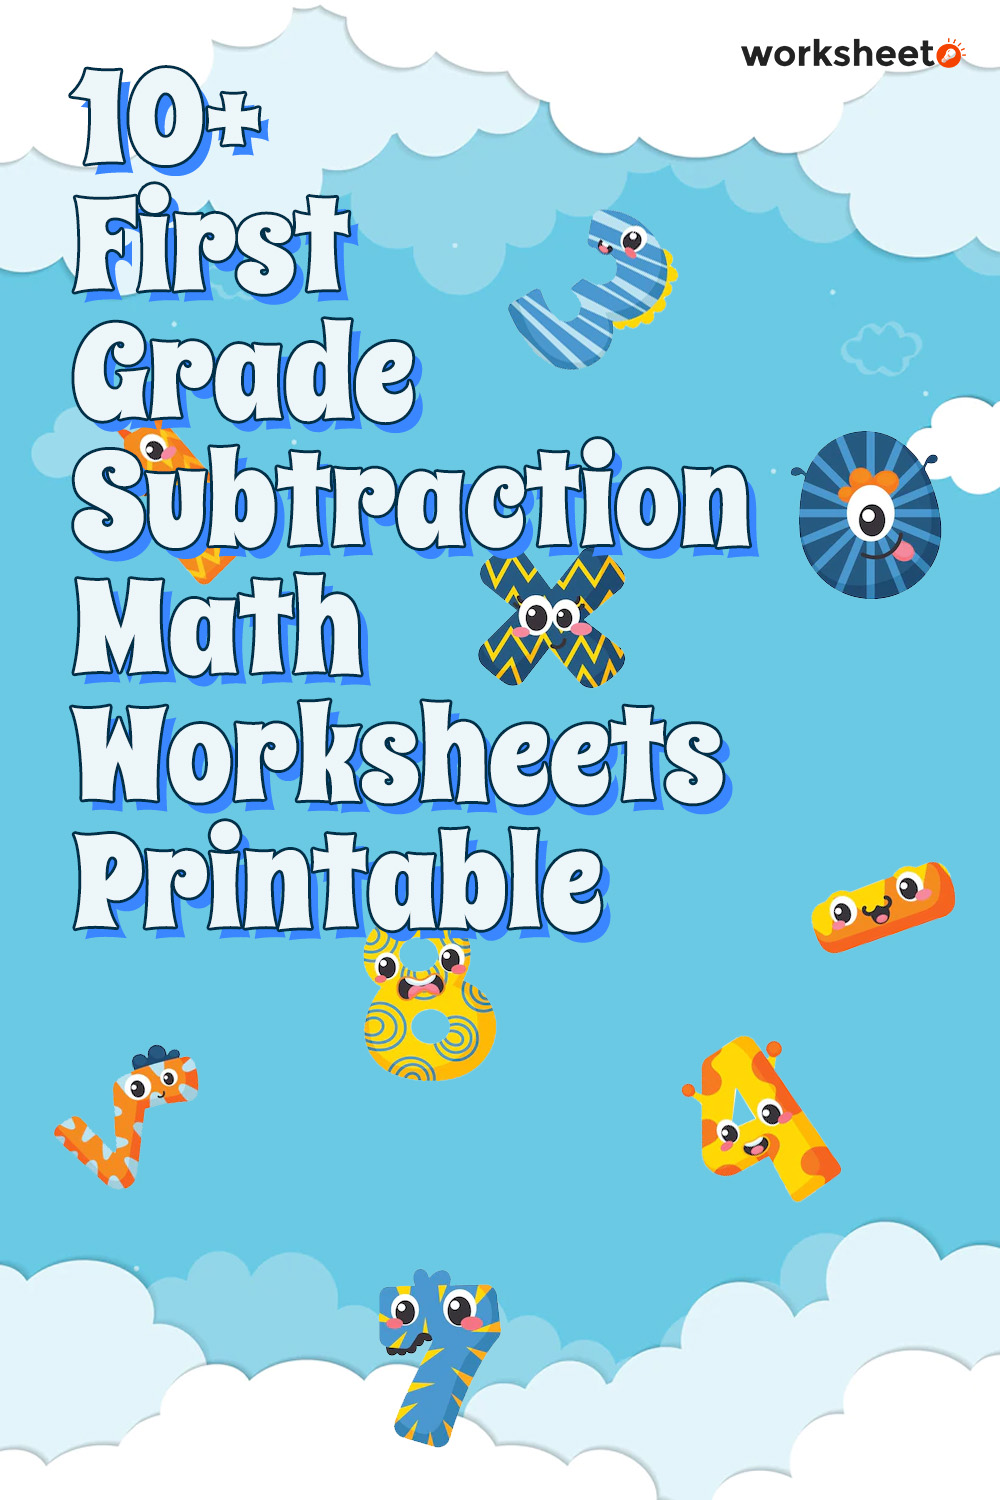 12 Images of First Grade Subtraction Math Worksheets Printable